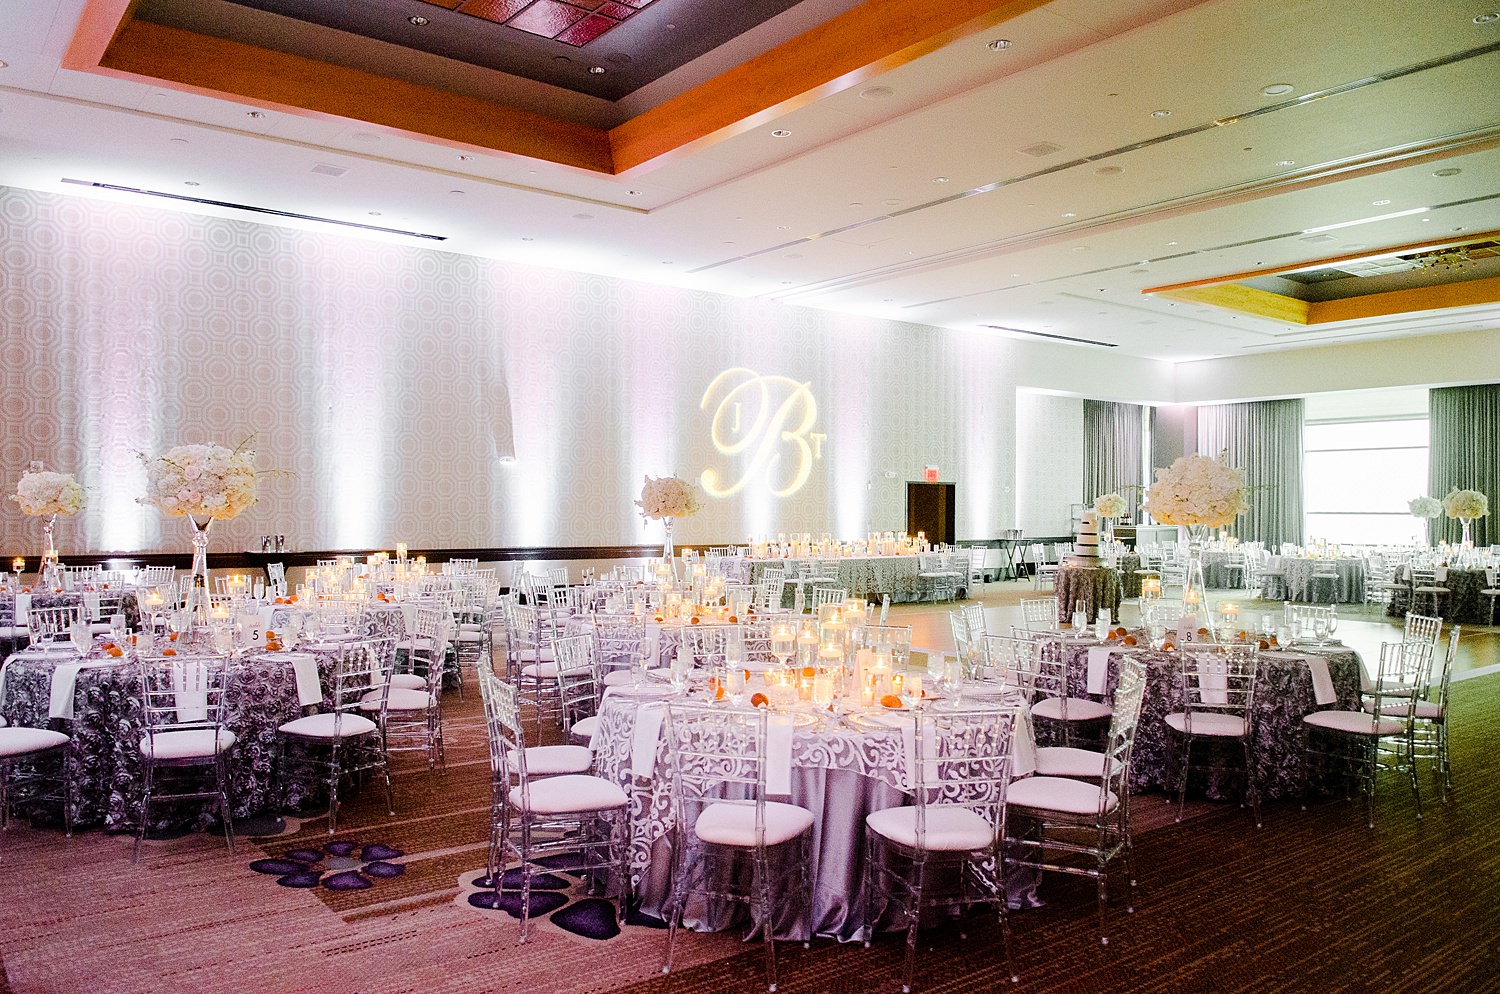 wedding receptions at the fairmont hotel pittsburgh • Recommended Vendors